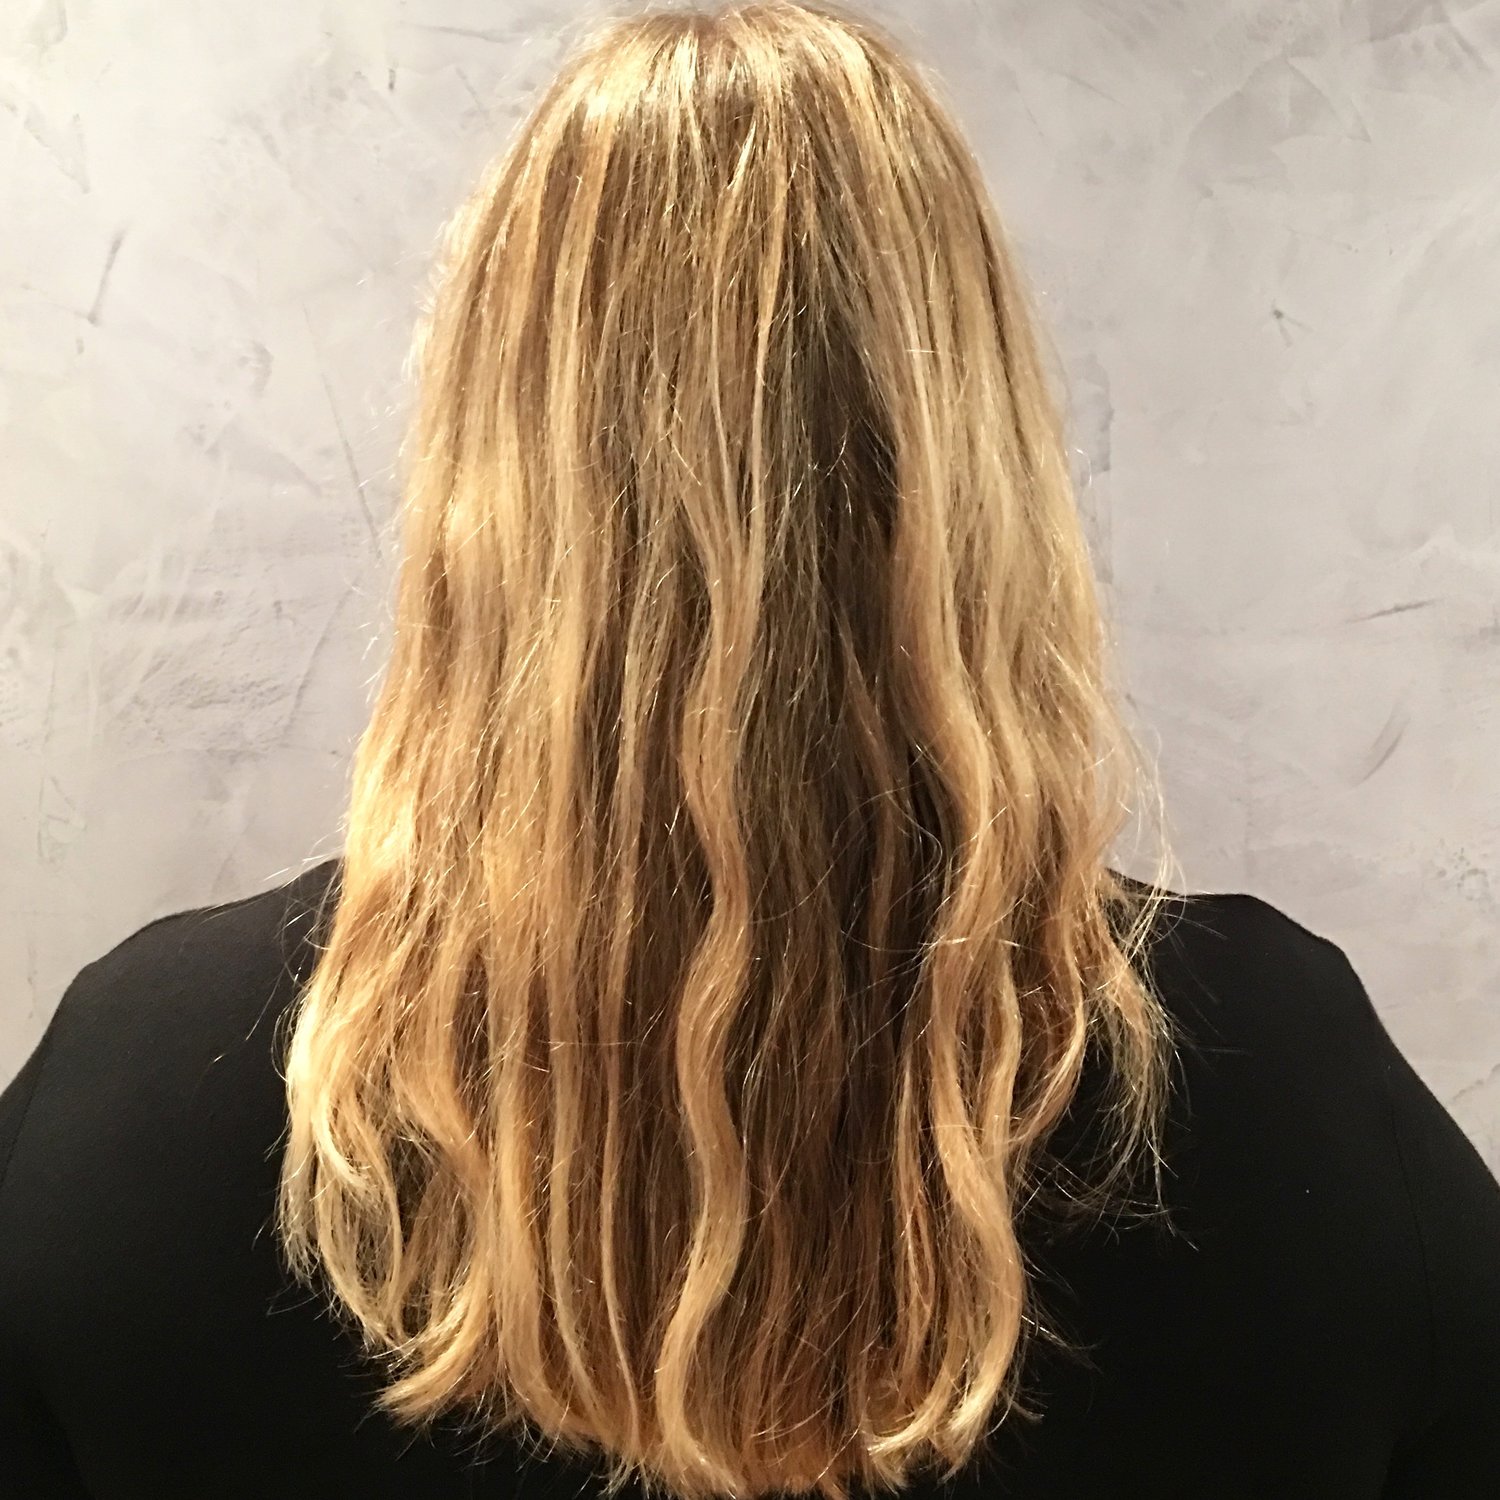 How To Wear Your Natural Waves Laura Braunstein Hair Studio